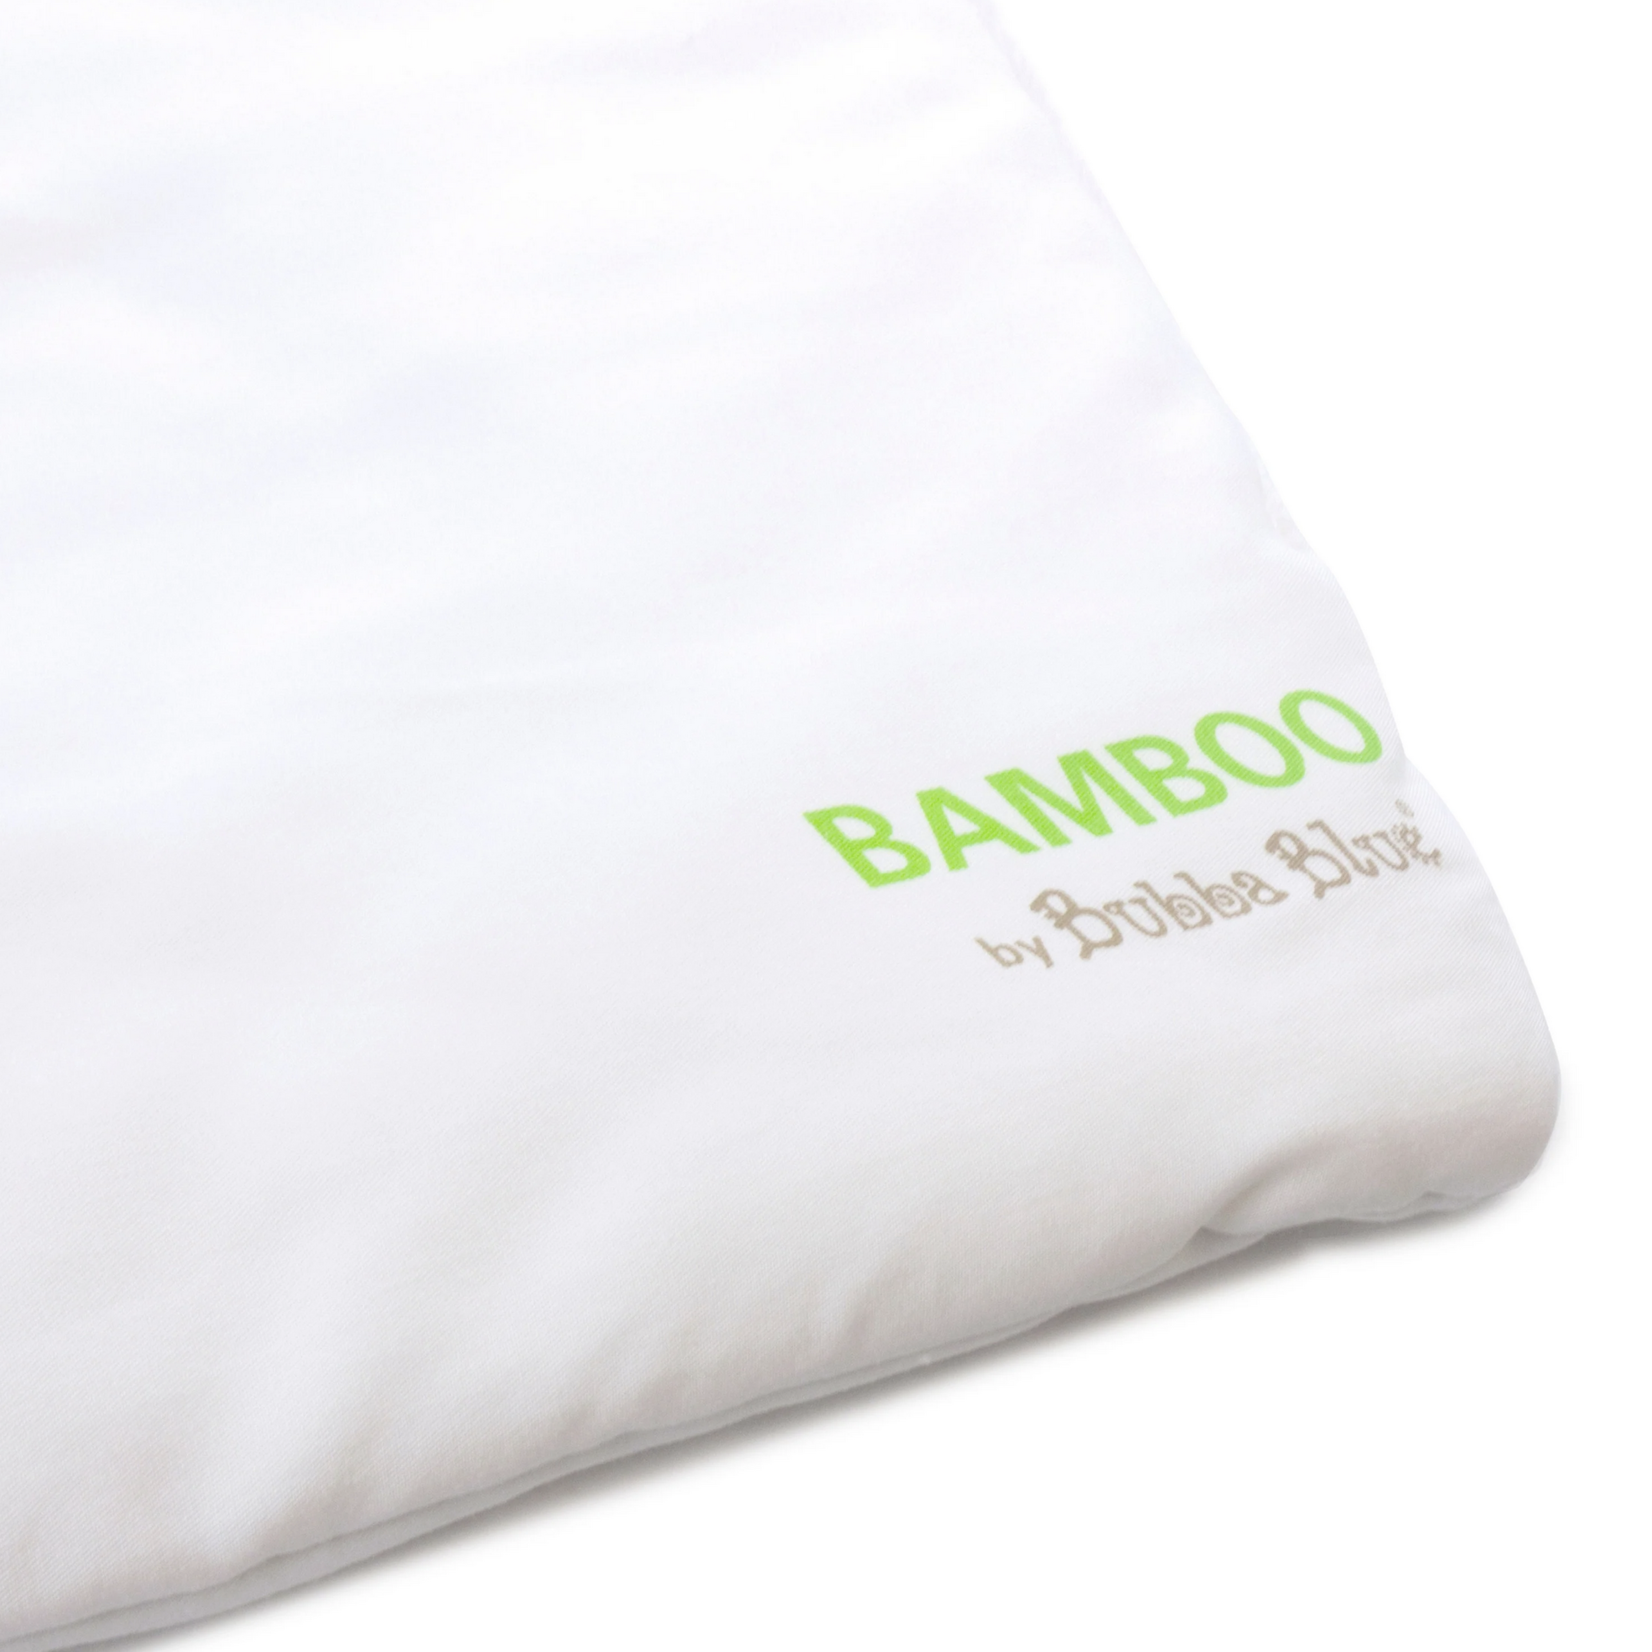 Bubba Blue Bamboo White Cot Pillow - Bamboo filling & casing with bamboo pillowcase